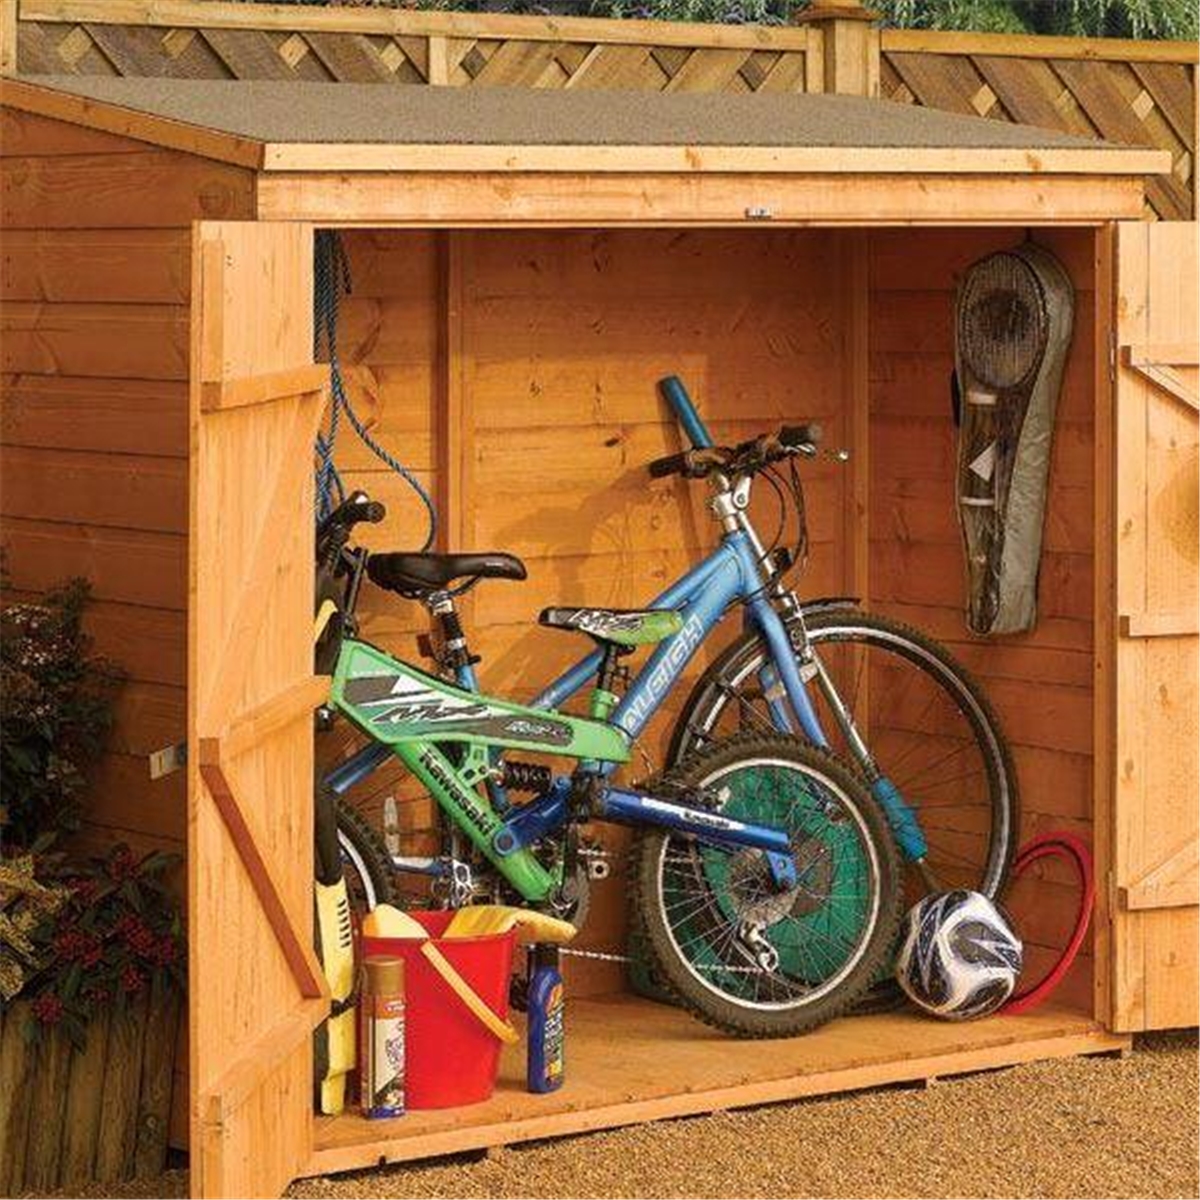 Shed storage ideas that you can buy on Amazon